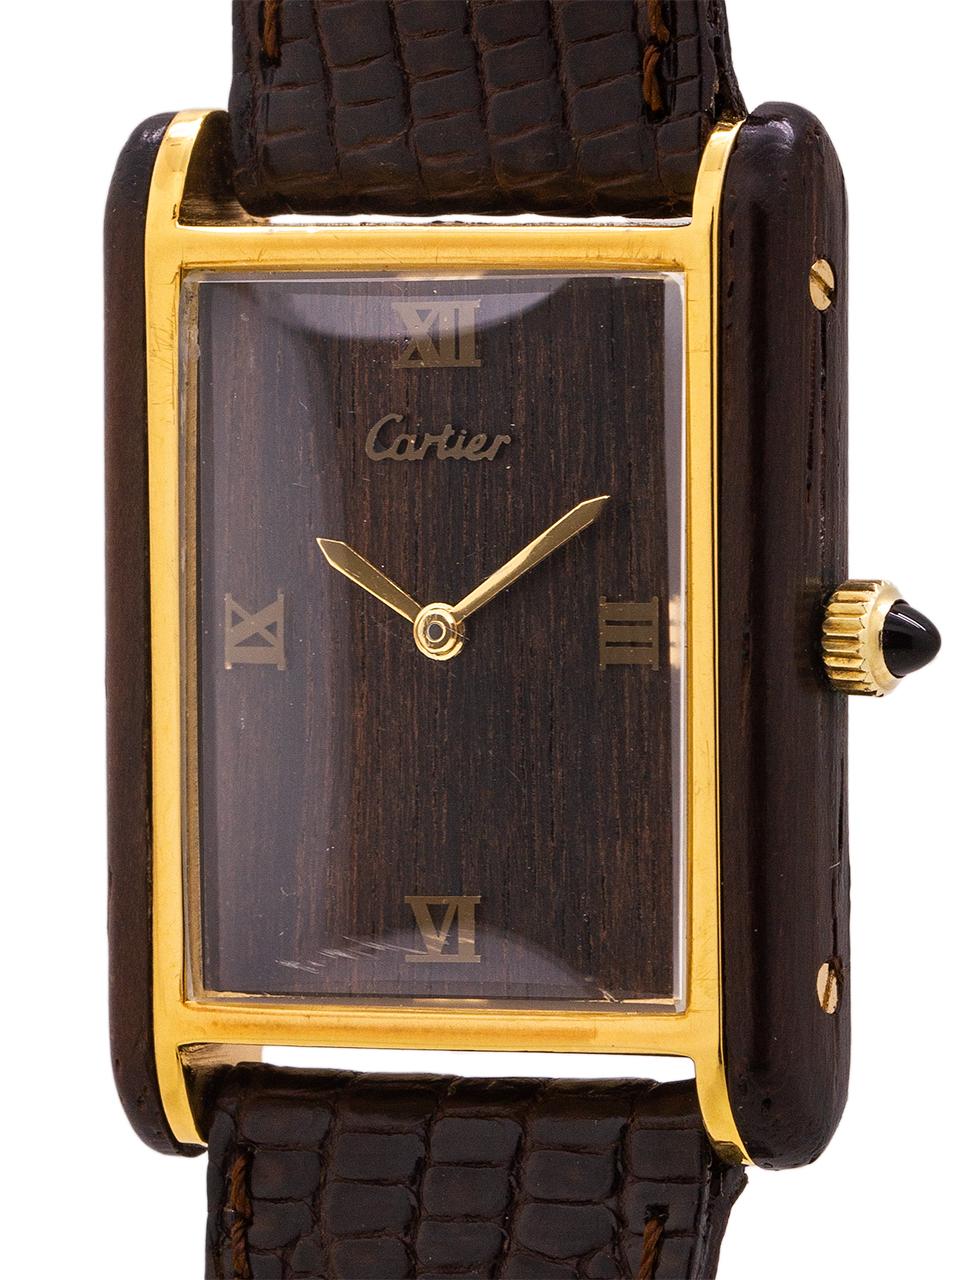 
Scarce 1970’s era Cartier man’s Tank Louis with wood dial and side case panels in exceptional condition with original strap and buckle.  Featuring a smallish man’s 24.5 X 29mm gold plated case with full Cartier signature and numbers on caseback.